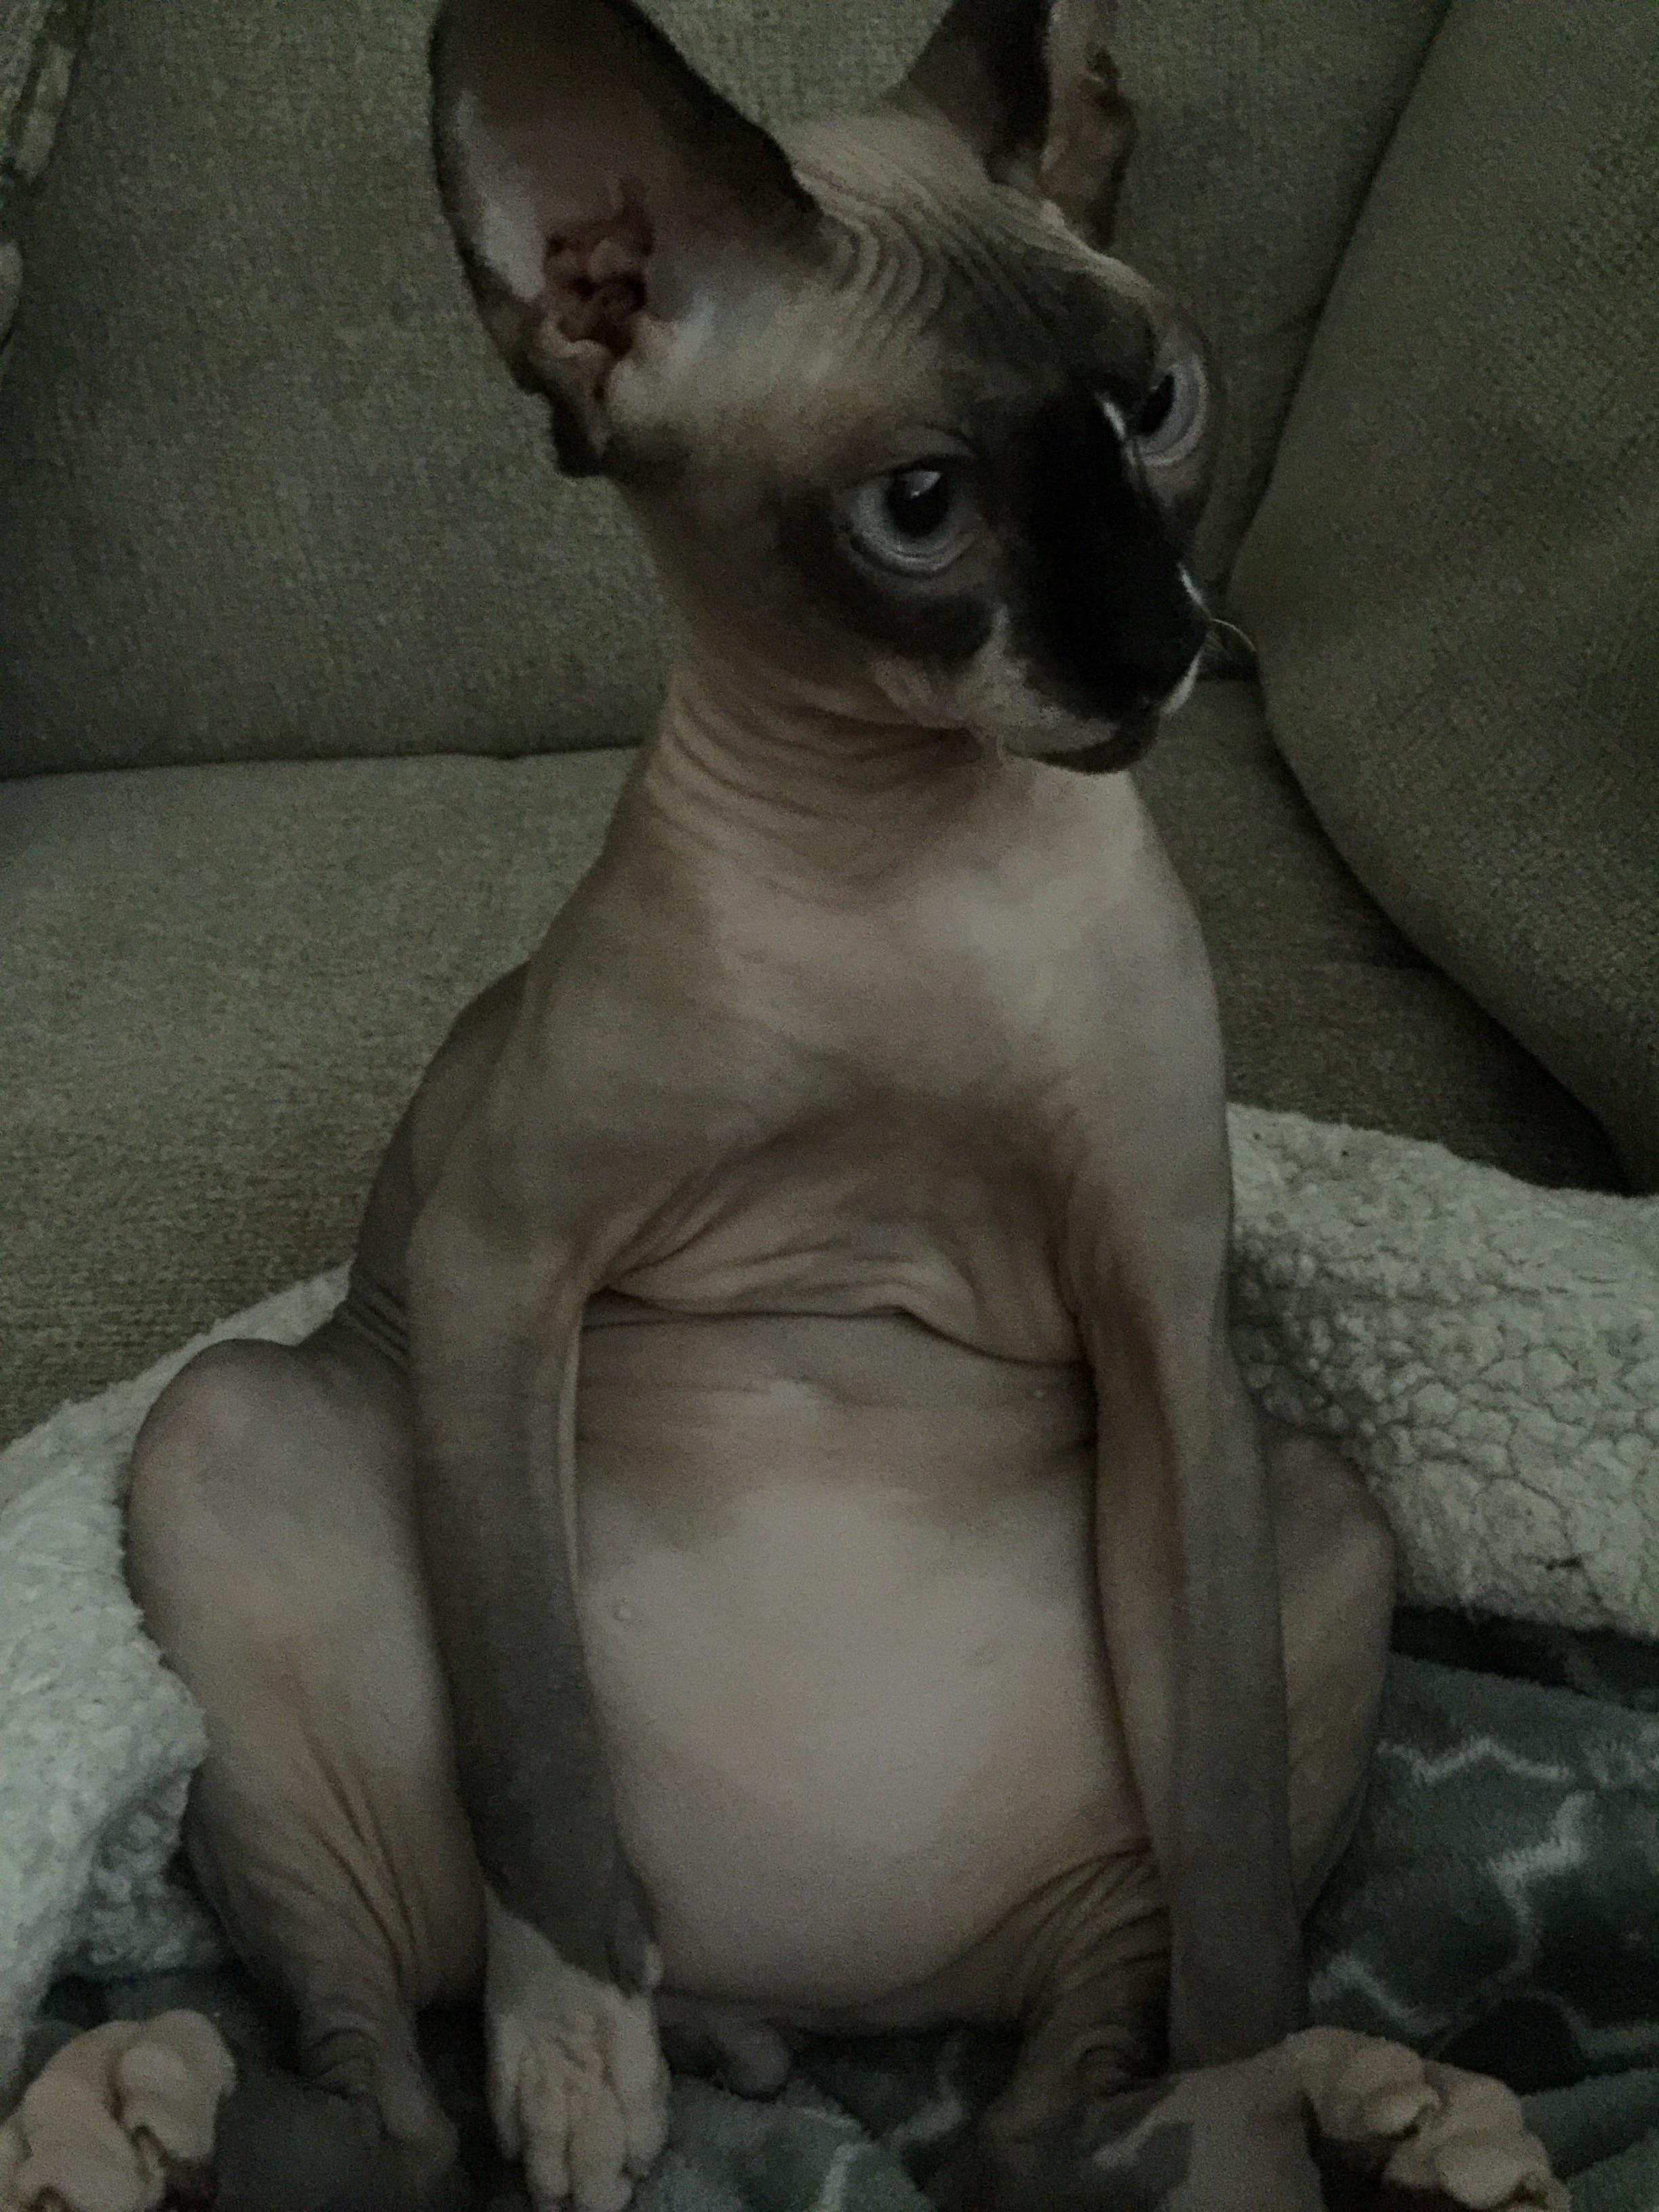 My naked cat smeagol waiting for that precious.